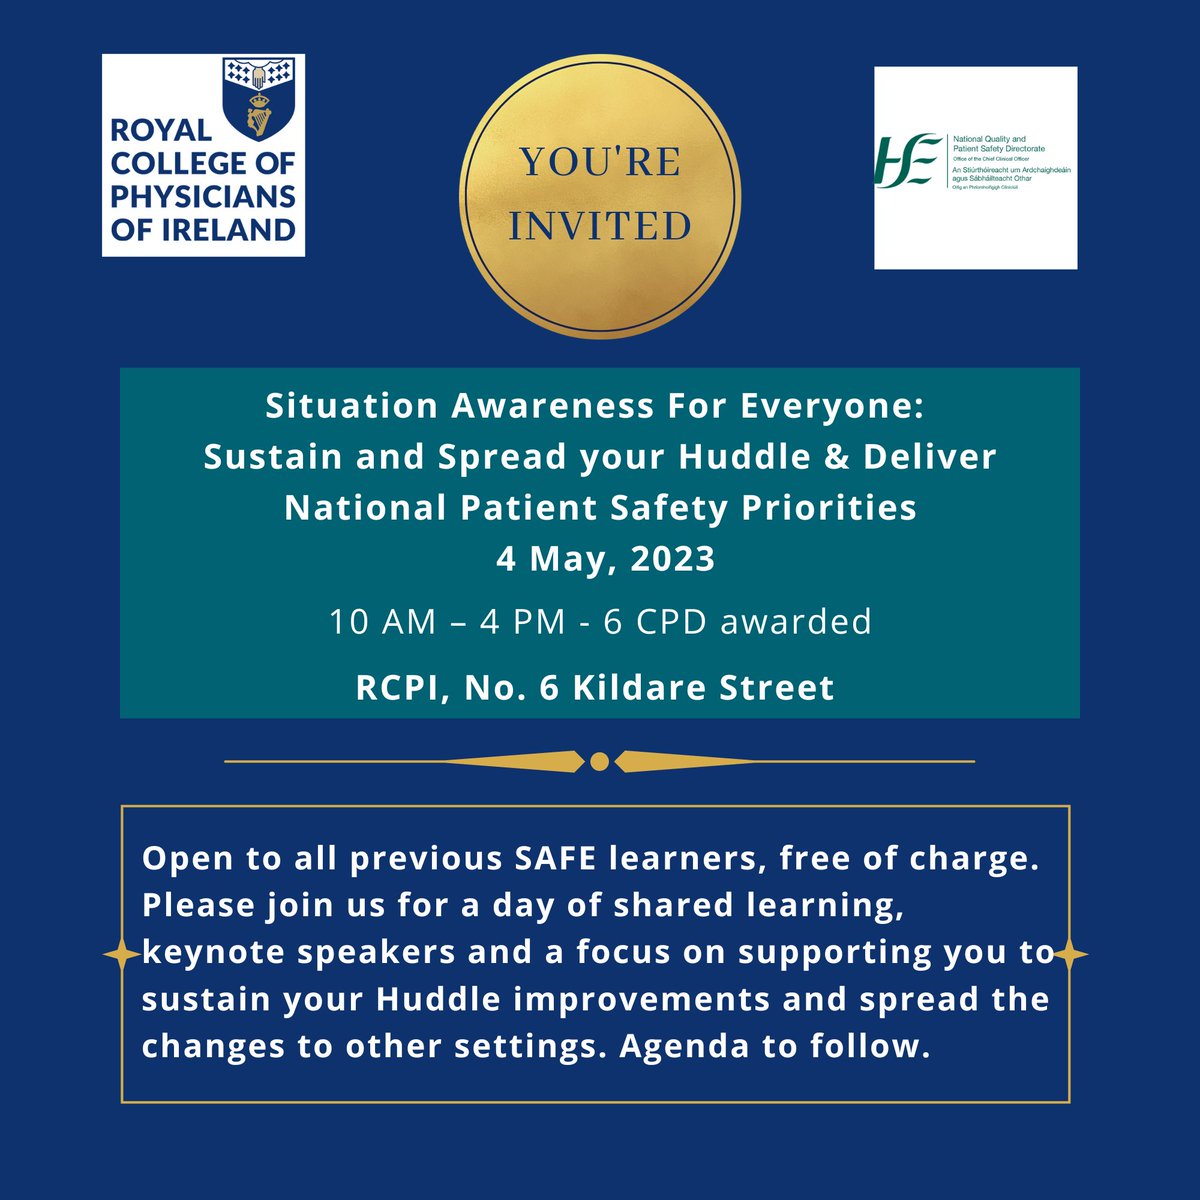 📣Calling all past @rcpi_news SAFE Collaborative learners! @NationalQPS is hosting an inaugural SAFE #SituationAwarenessForEveryone Workshop on 4th May for SAFE teams & senior leaders from the previous 5 cohorts. 6 CPD awarded. Click here: bit.ly/3KE406U #PatientSafety